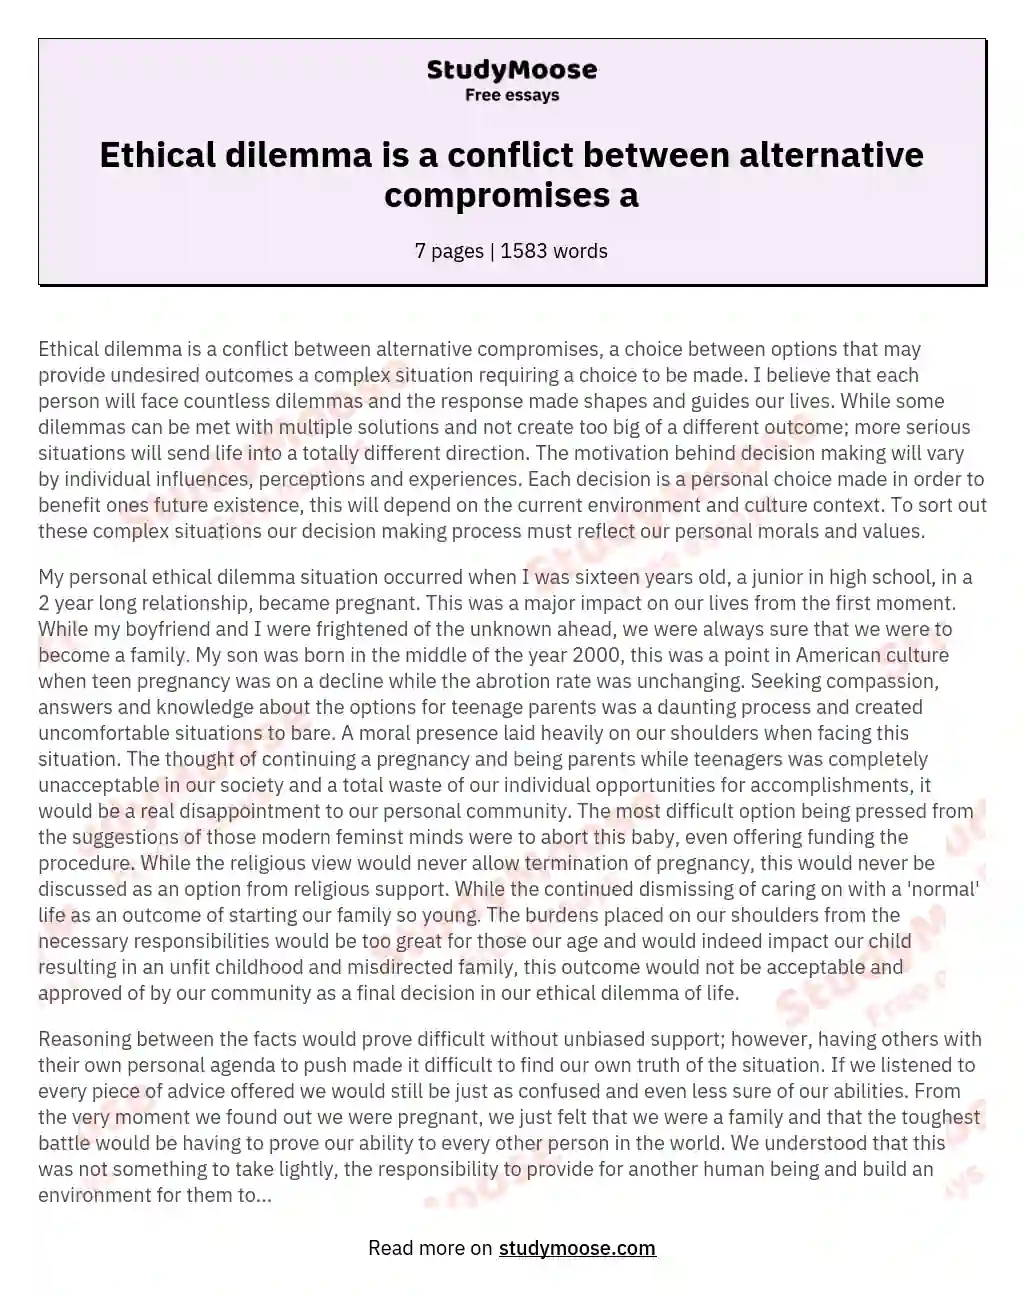 Ethical dilemma is a conflict between alternative compromises a essay